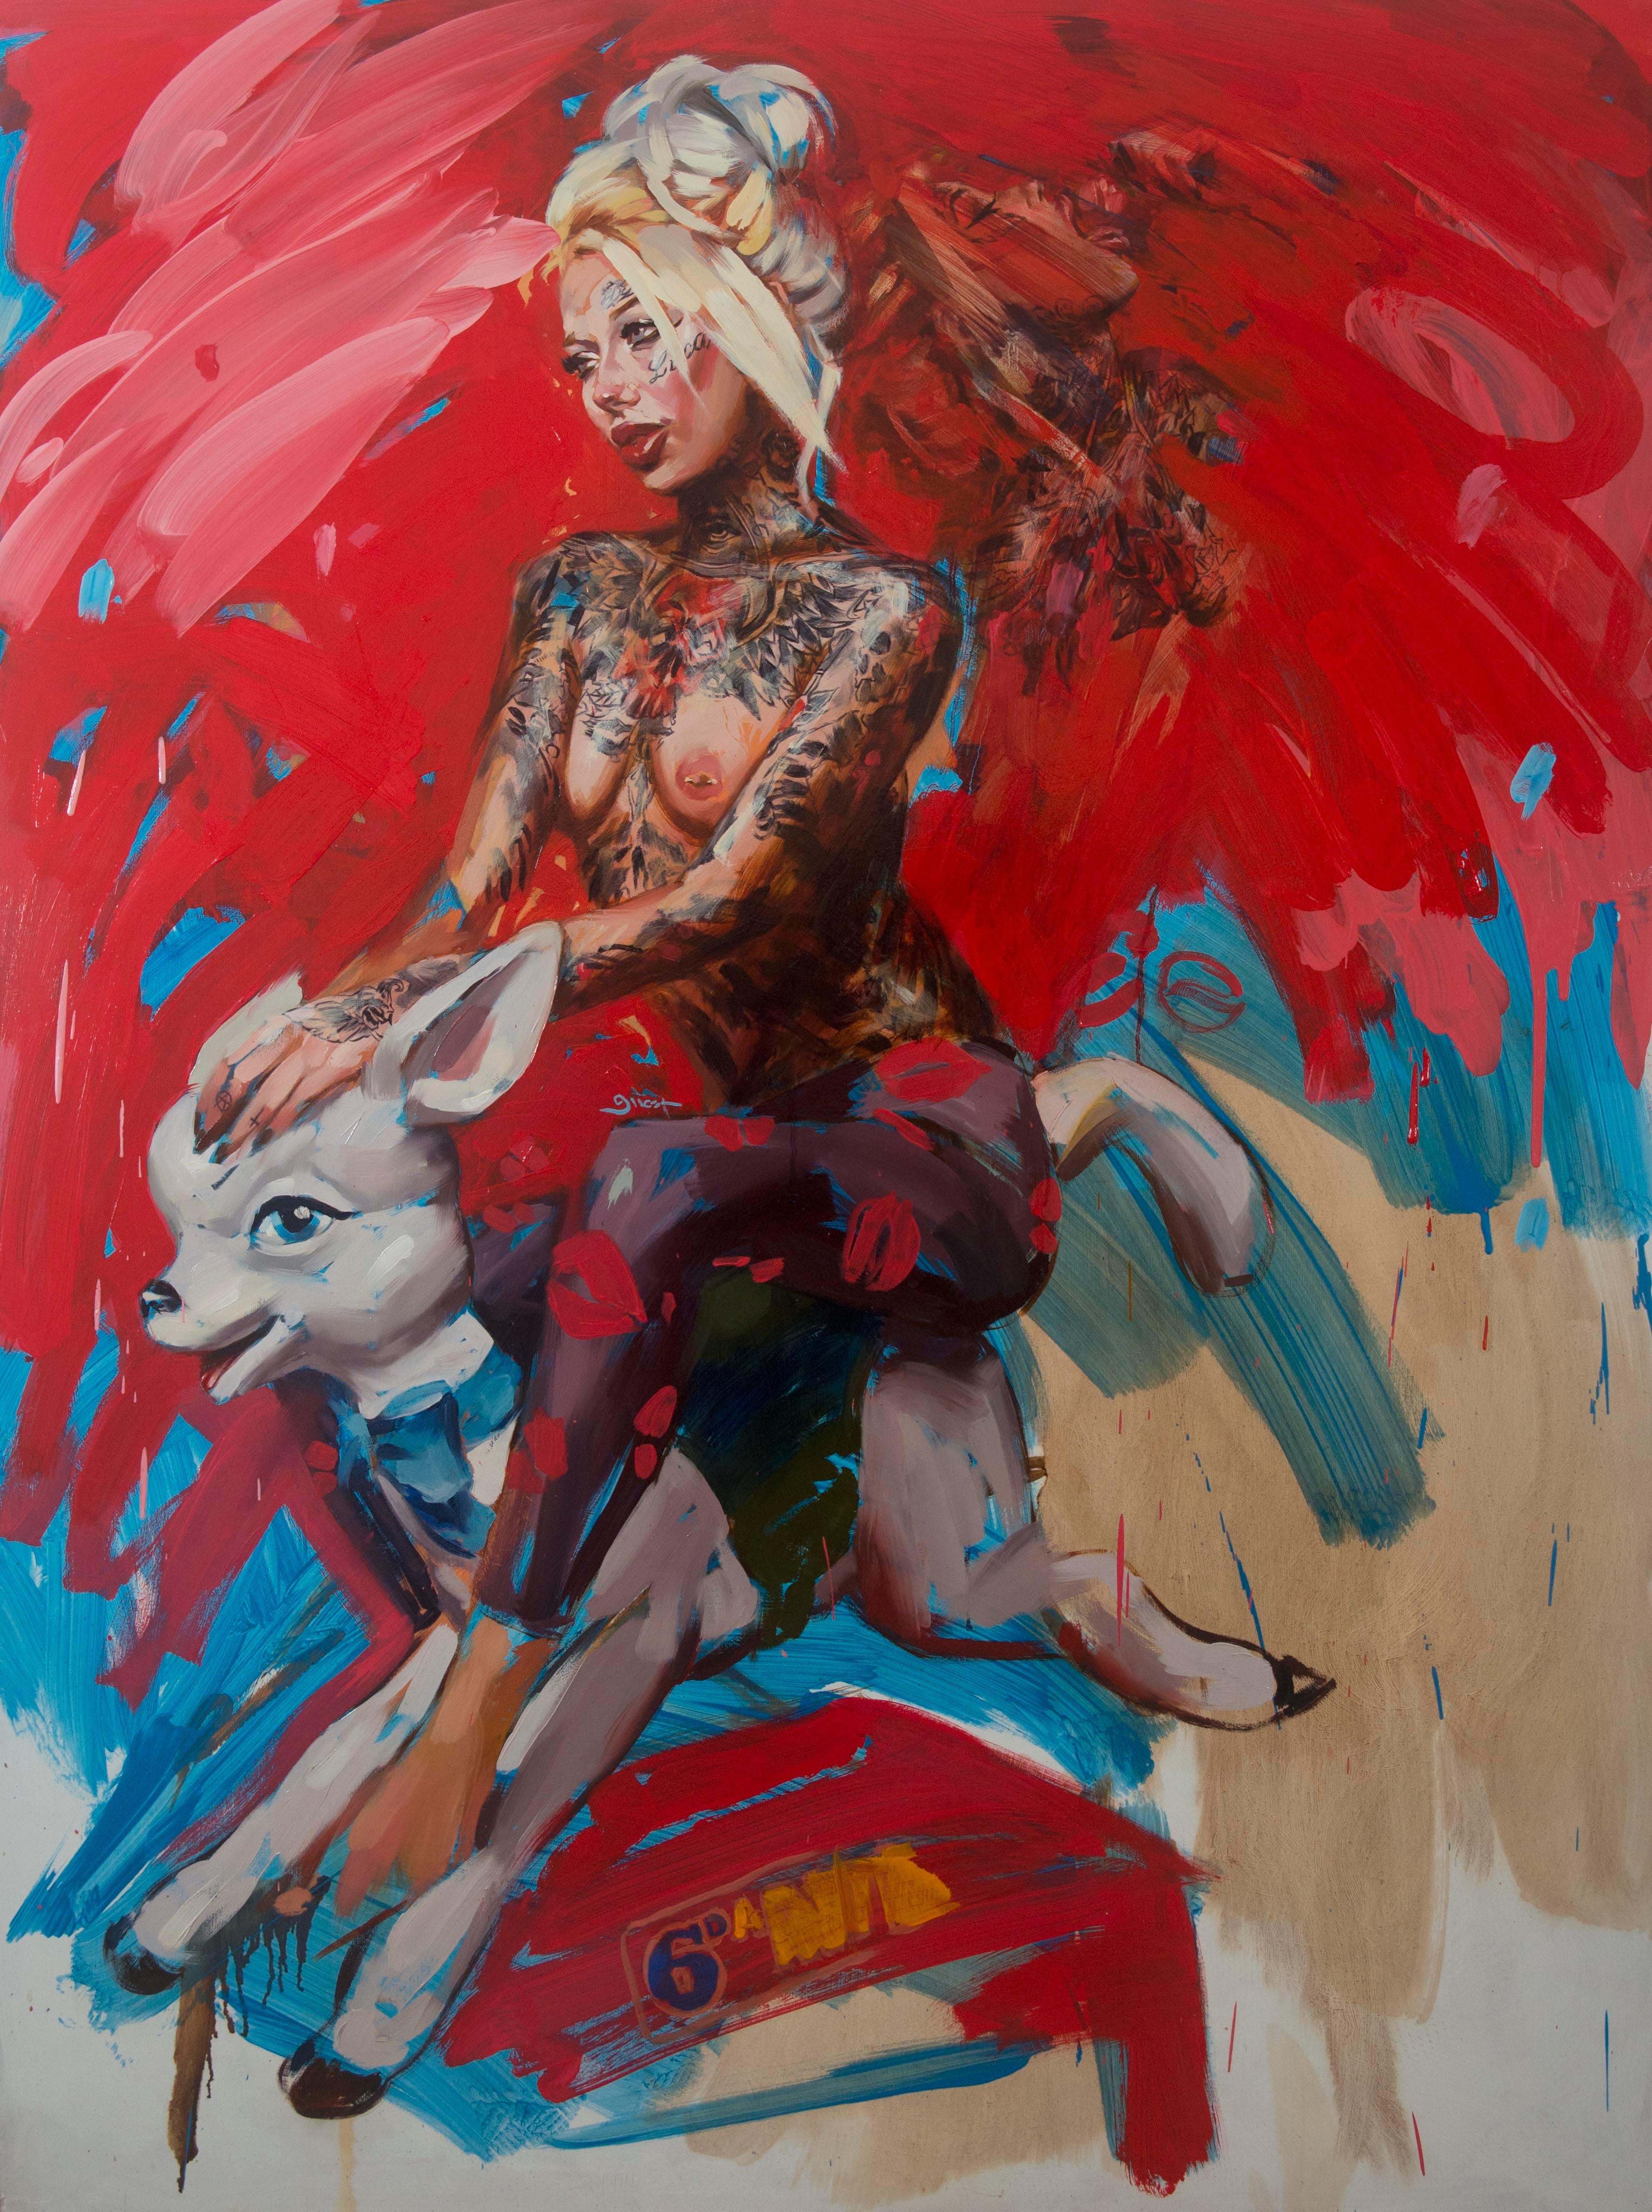 Chris Guest Portrait Painting - Funfair Ride on Red, oil on canvas, pin up, tattoo, modern, 21st century